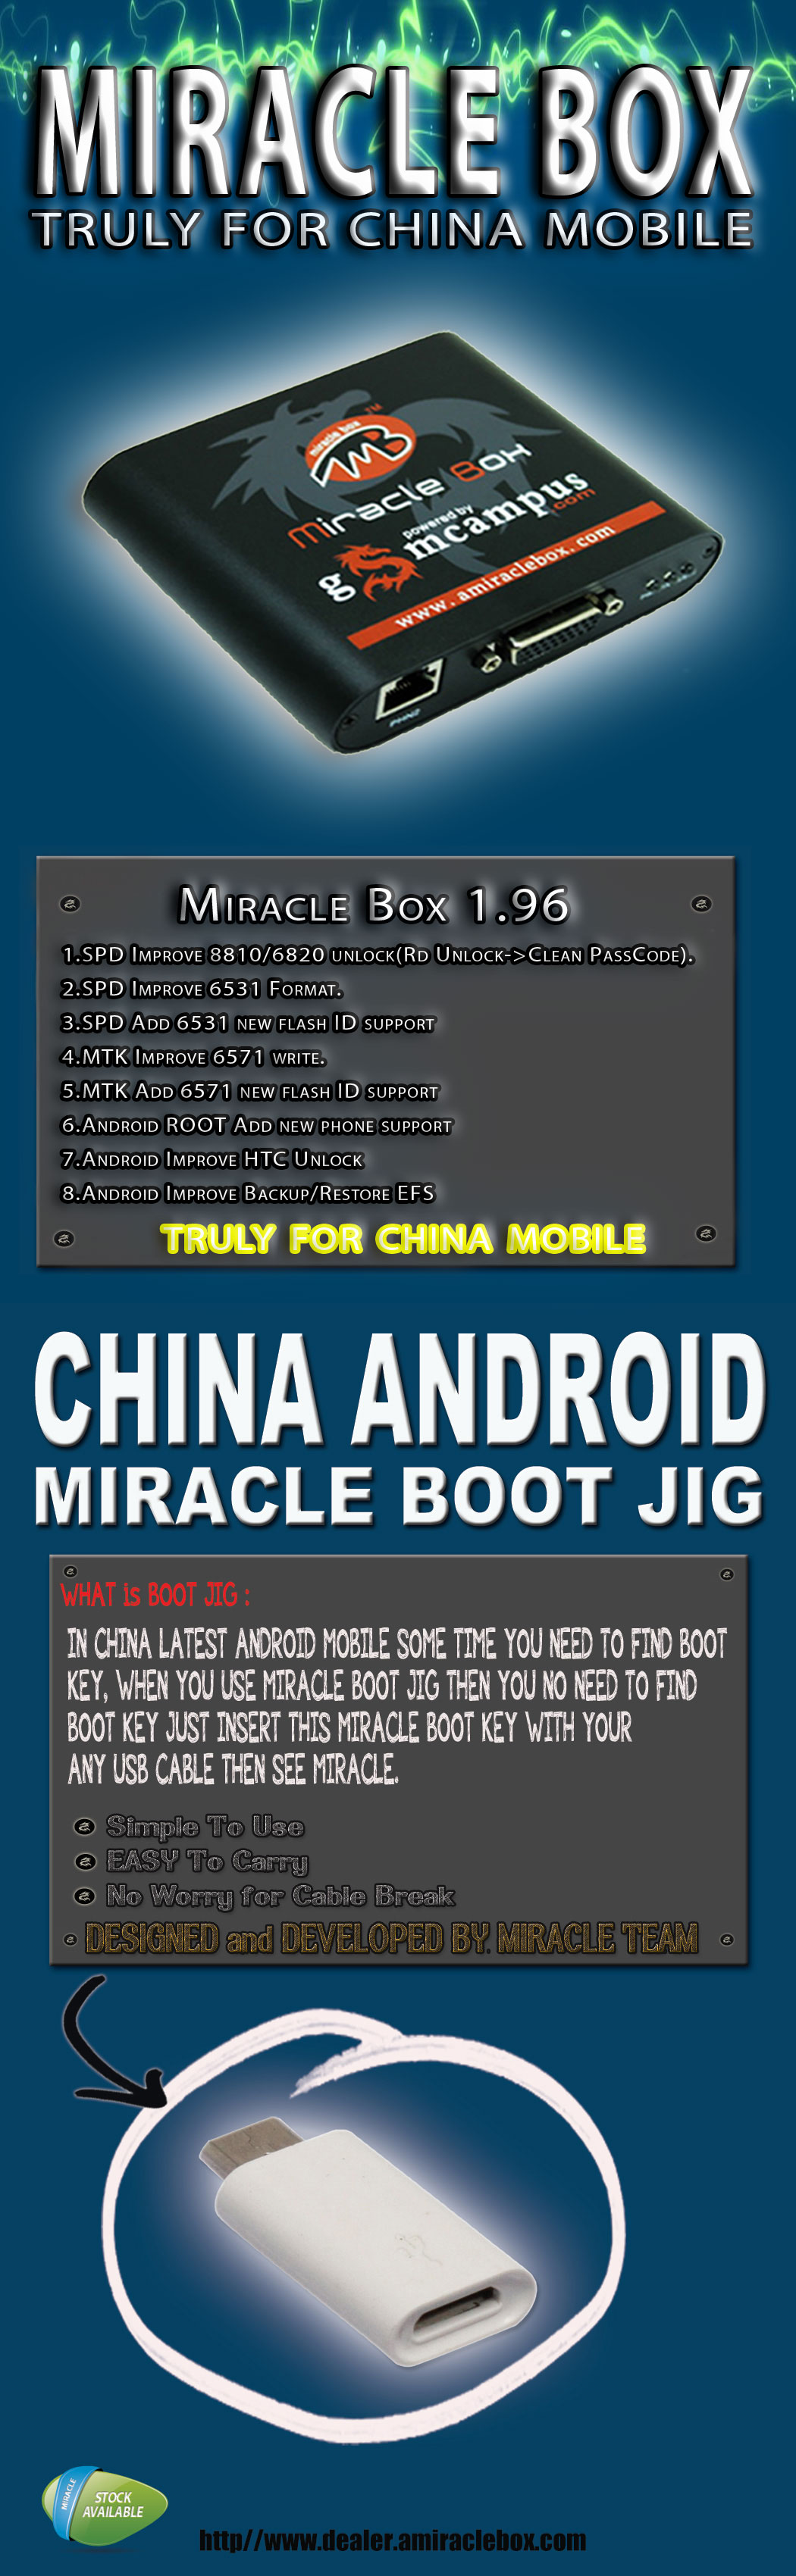 MIRACLE BOX 1.96 (MTK/SPD/ANDROID) 27th Nov 2014